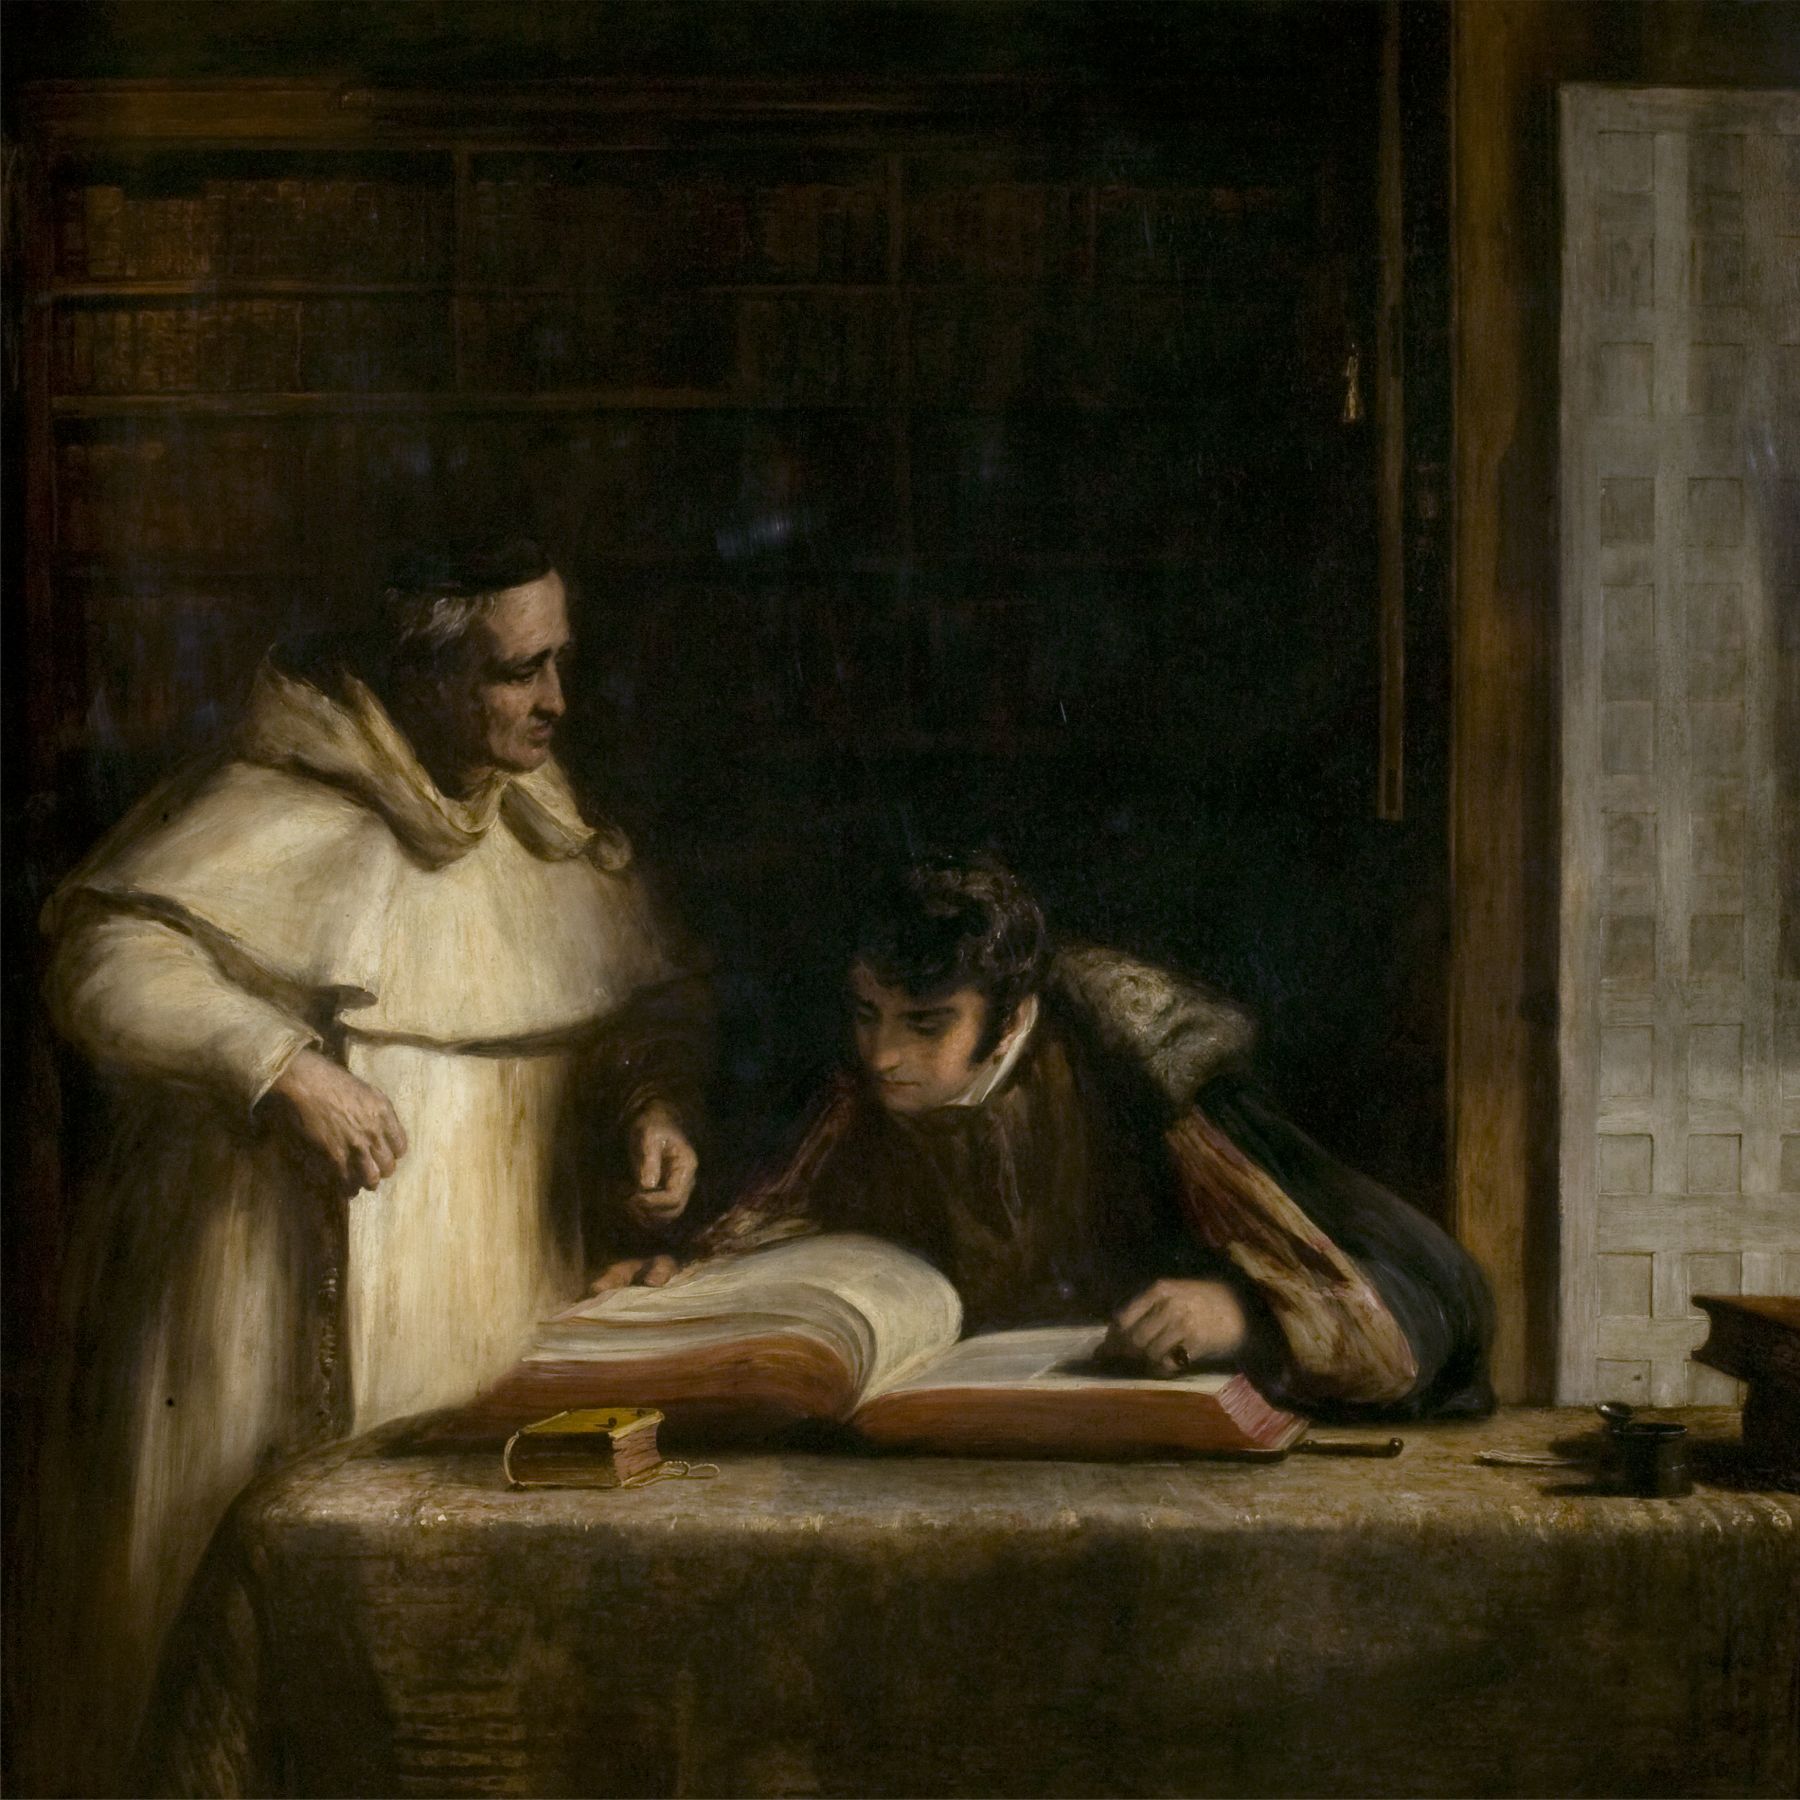 'Washington Irving in the Archives at Seville’ by David Wilkie